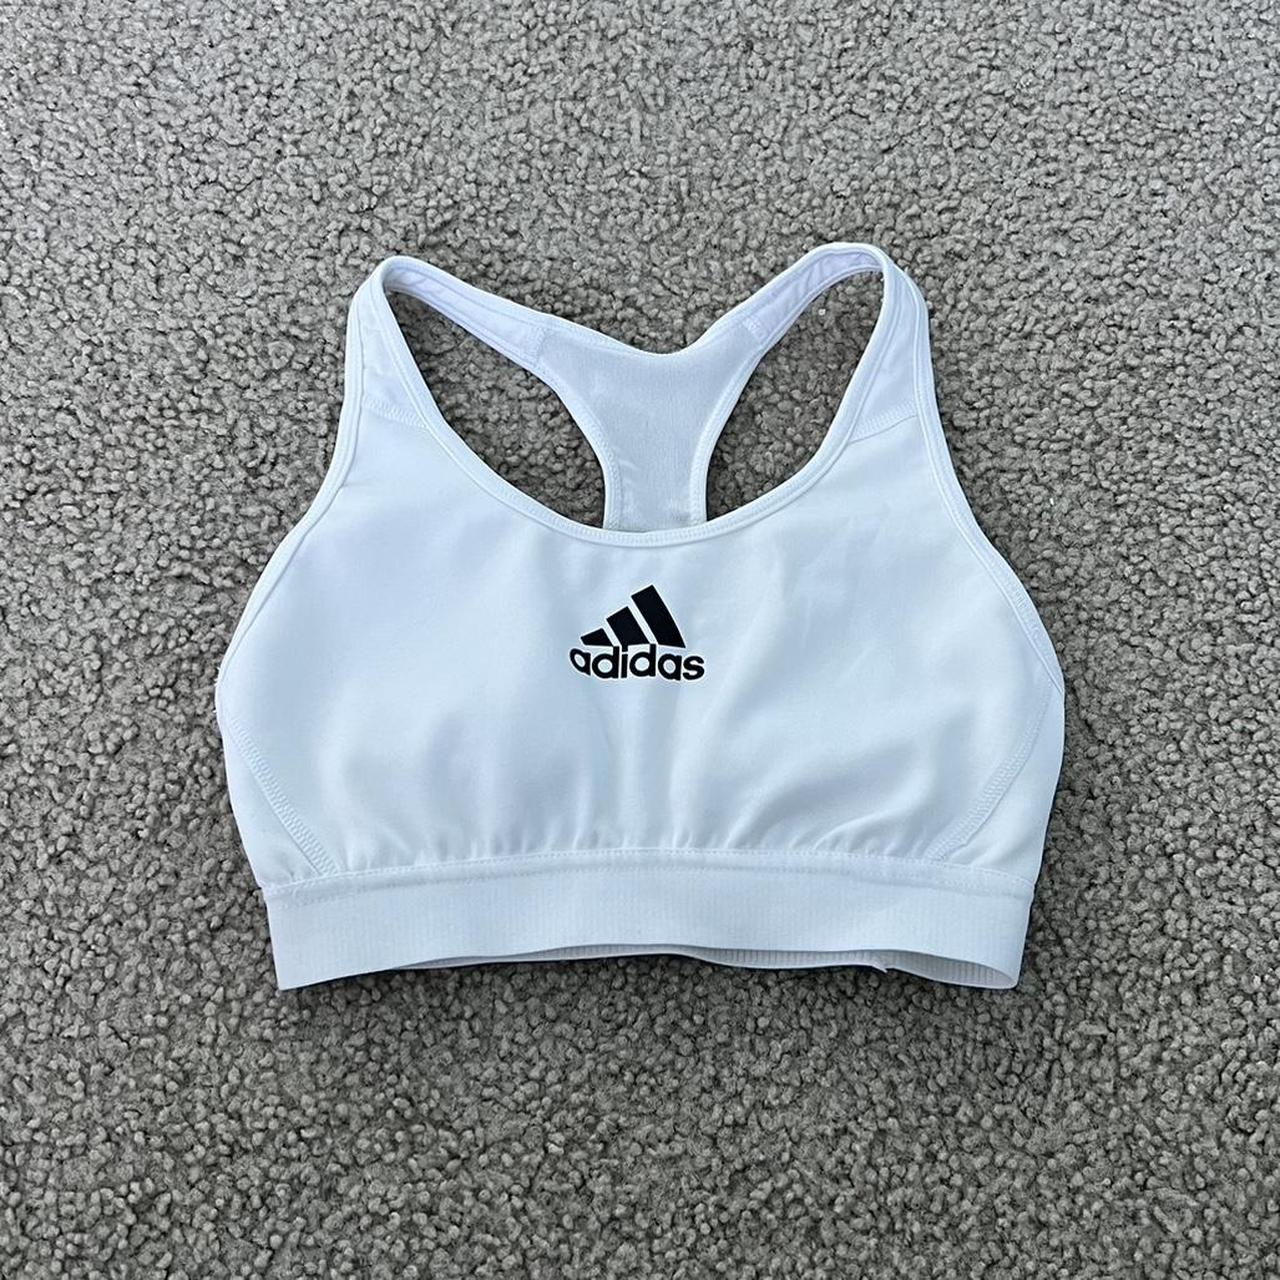 thick and nice material sports bra/athletic workout - Depop